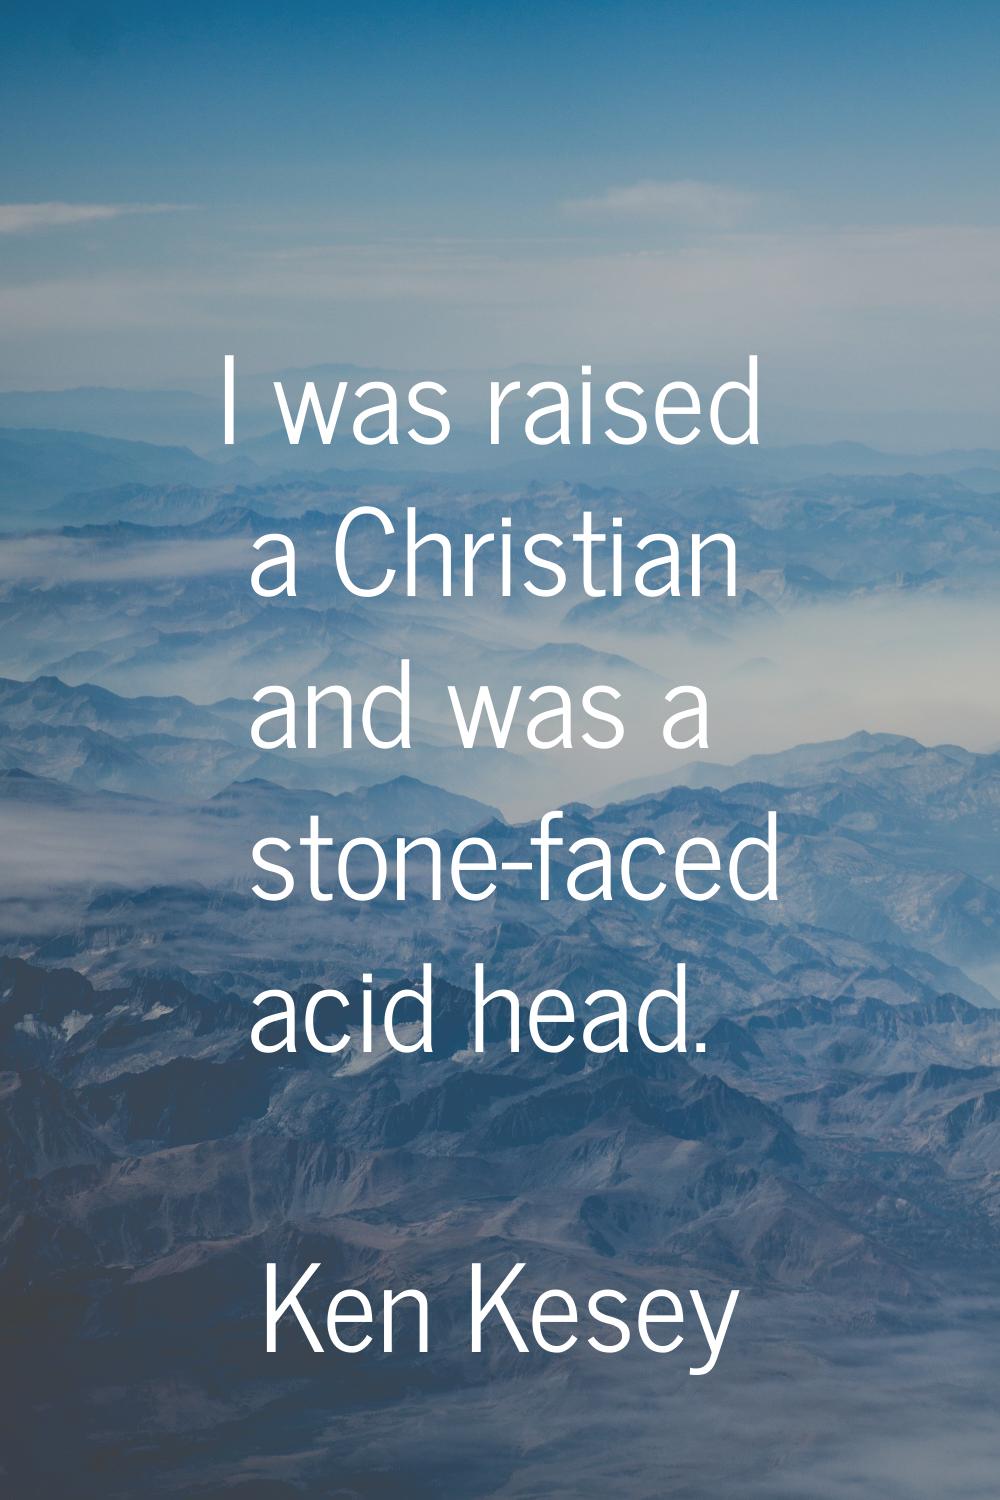 I was raised a Christian and was a stone-faced acid head.